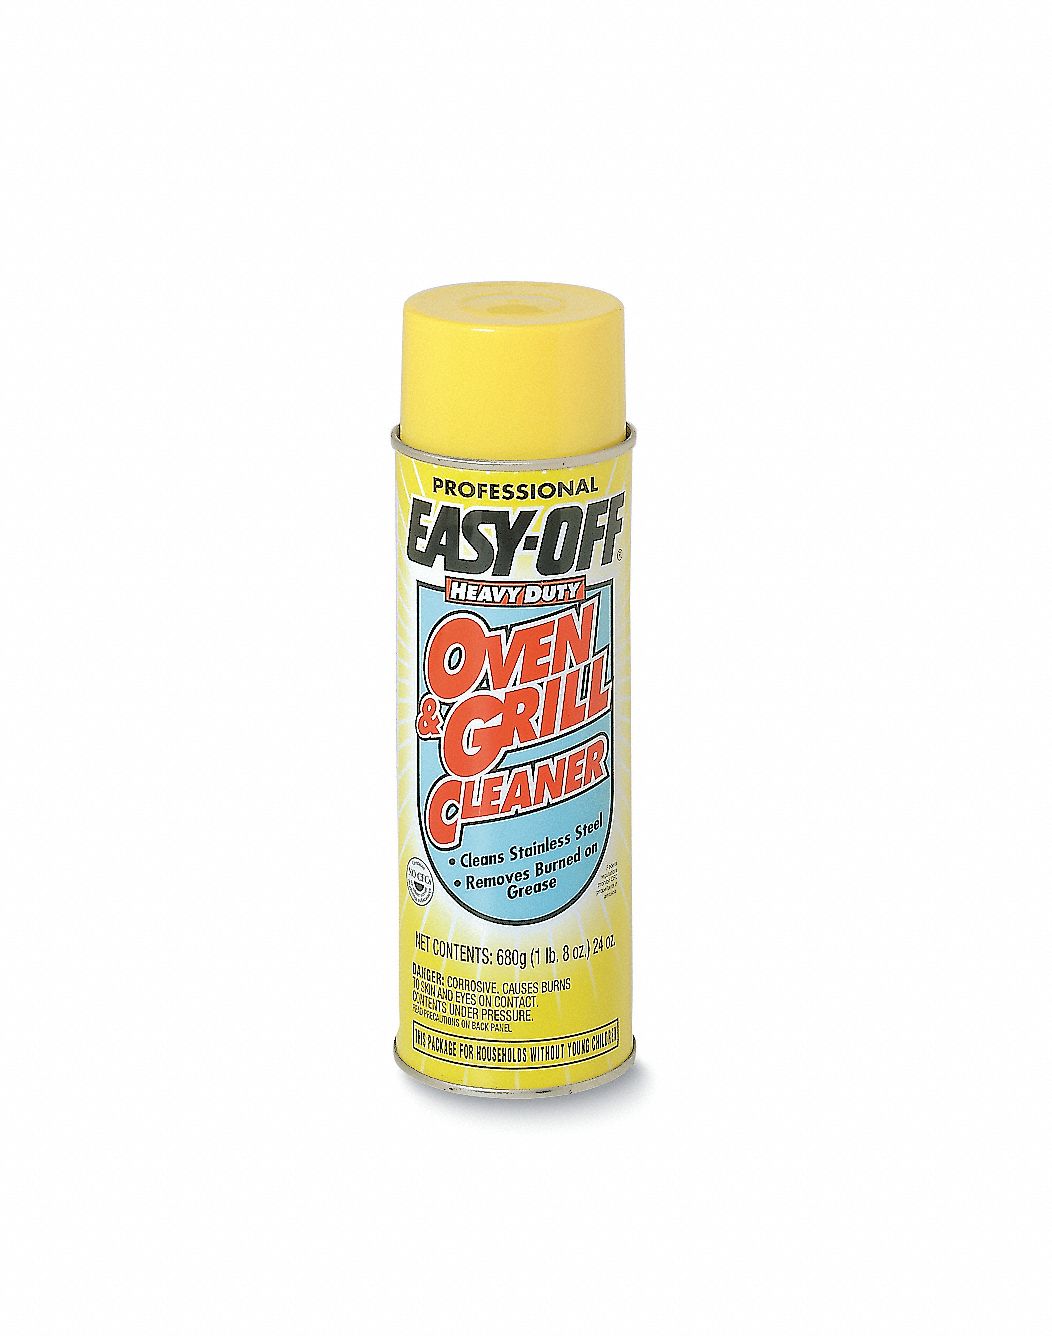 Easy Off Professional Oven & Grill Cleaner, Heavy Duty - 24 oz